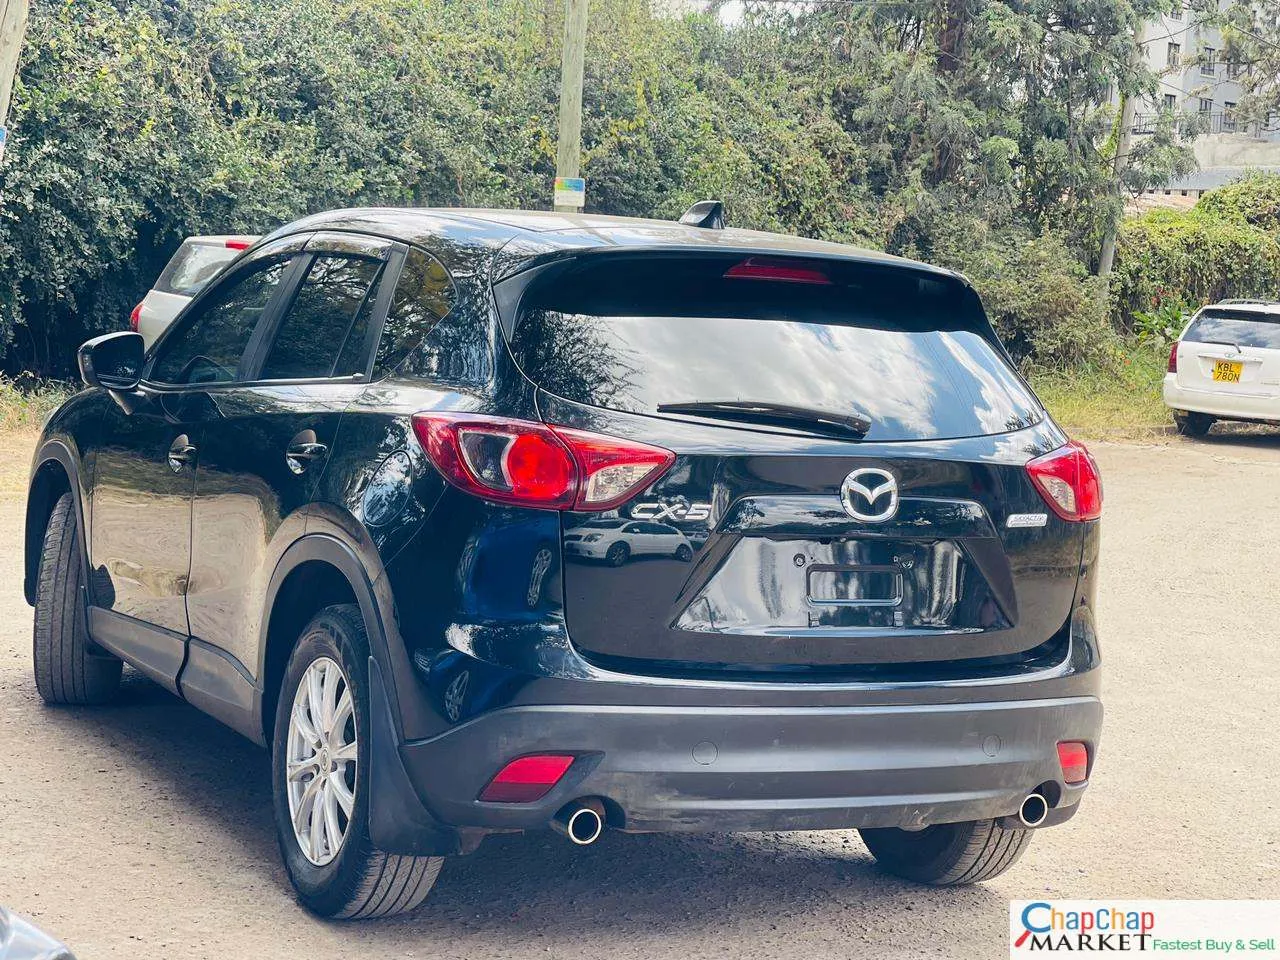 Cars Cars For Sale-Mazda CX5 for sale in kenya hire purchase installments You Pay 30% DEPOSIT TRADE IN OK EXCLUSIVE Mazda cx5 Kenya petrol 🔥 9